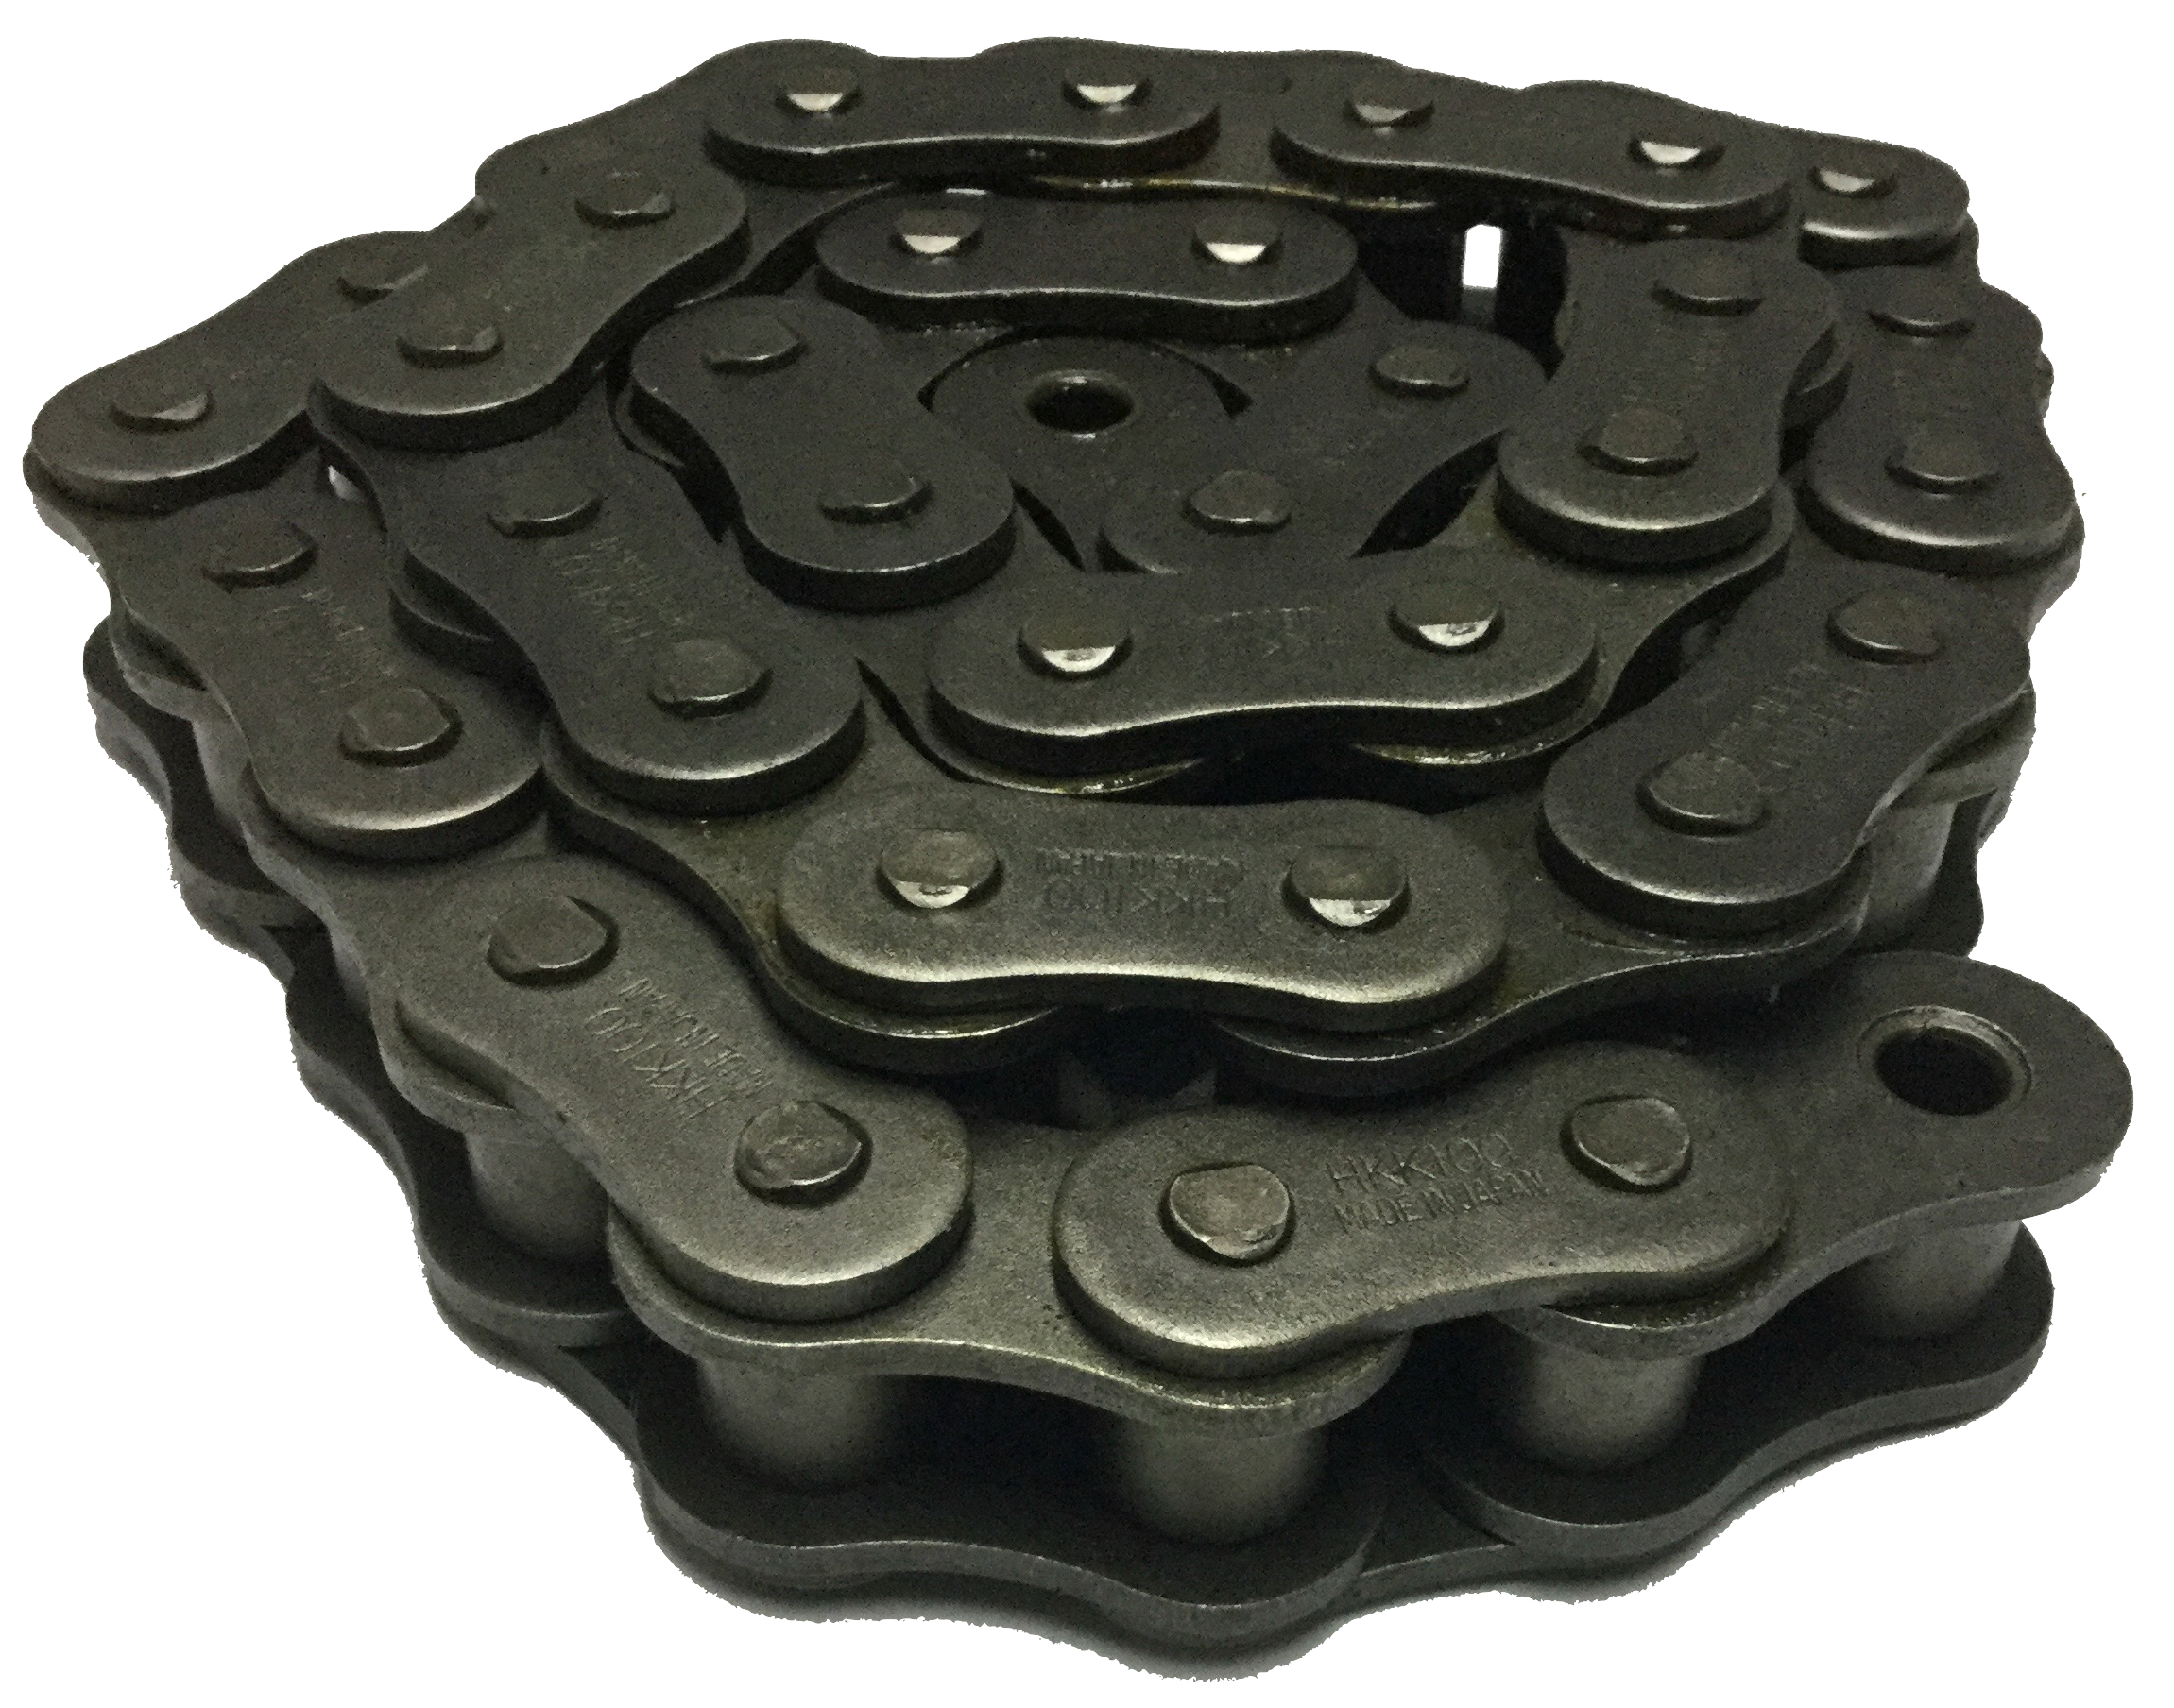 HKK #100 Standard Riveted Roller Chain (1.250" Pitch) - SOLD BY THE FOOT - Froedge Machine & Supply Co., Inc.